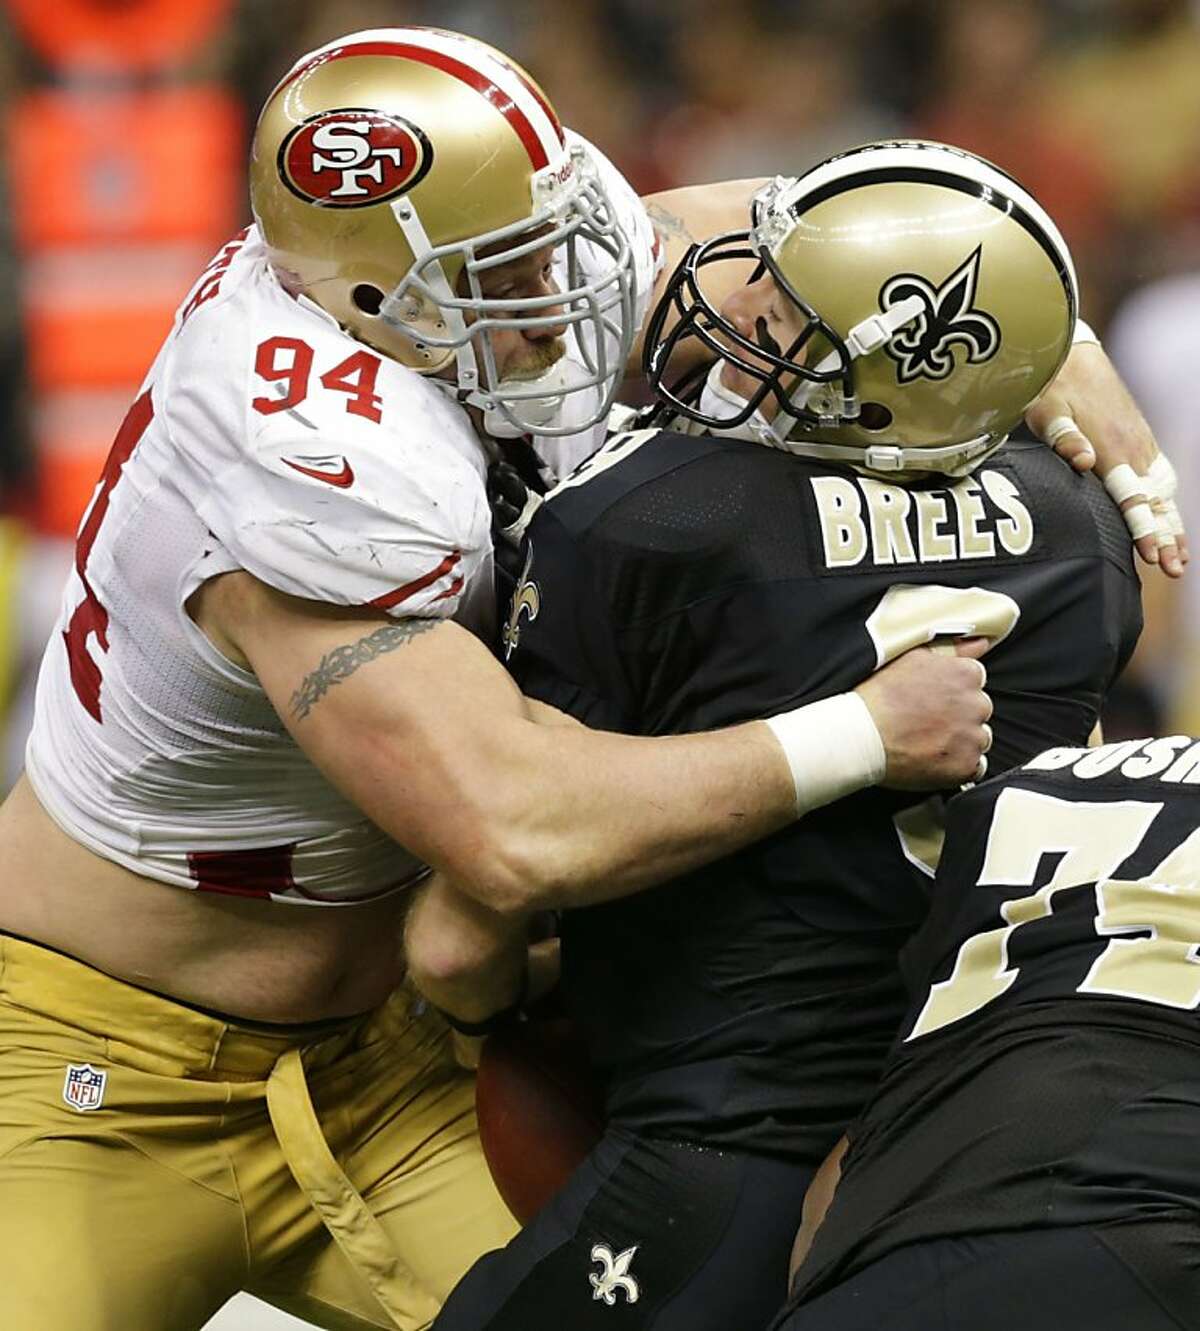 Saints49ers1933.jpg San Francisco 49ers defensive end Justin Smith (94) sacks New Orleans Saints quarterback Drew Brees (9) in a game between the New Orleans Saints and San Francisco 49ers at the Mercedes-Benz Superdome in New Orleans, La., Sunday, Nov. 25, 2012. (By MATTHEW HINTON /SPECIAL TO THE CHRONICLE